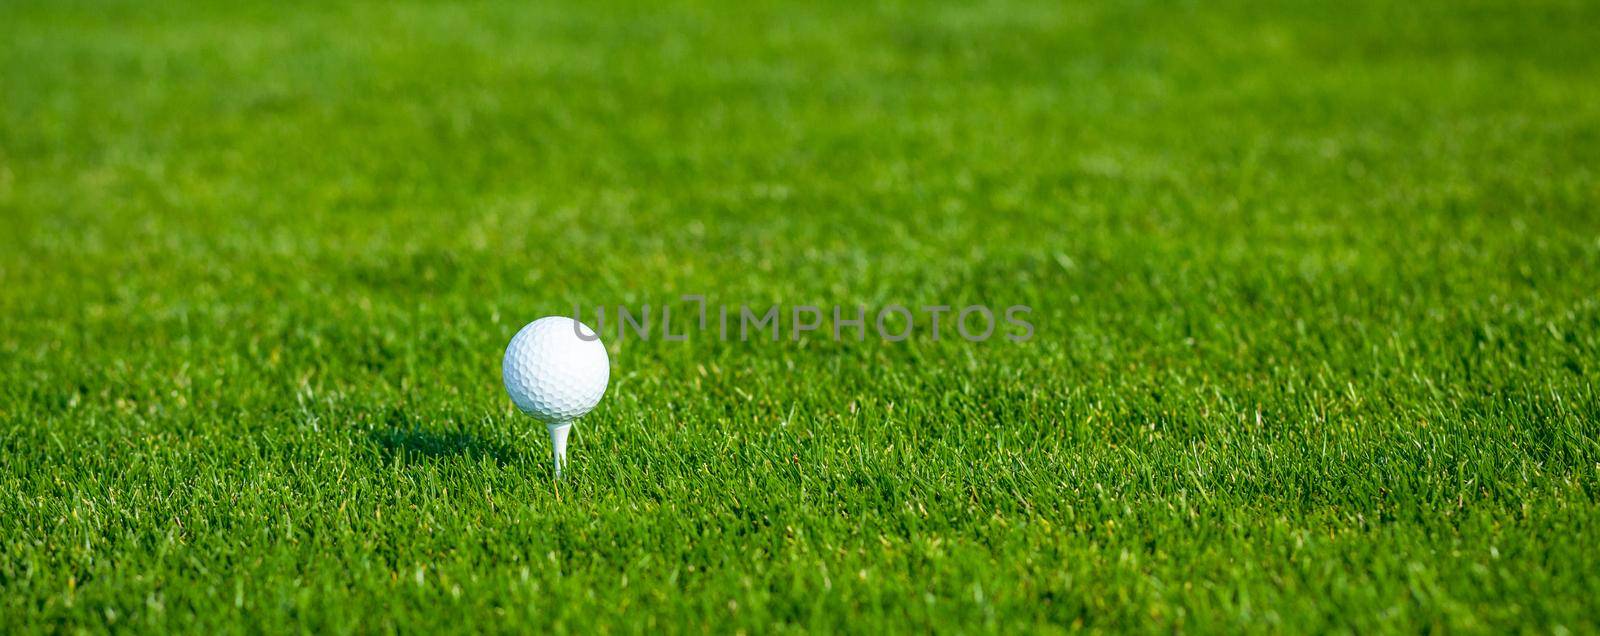 Golf Ball on a Tee in Low Grass on a Golf Course on a Sunny Day. Copy Space. Close-up. High quality photo